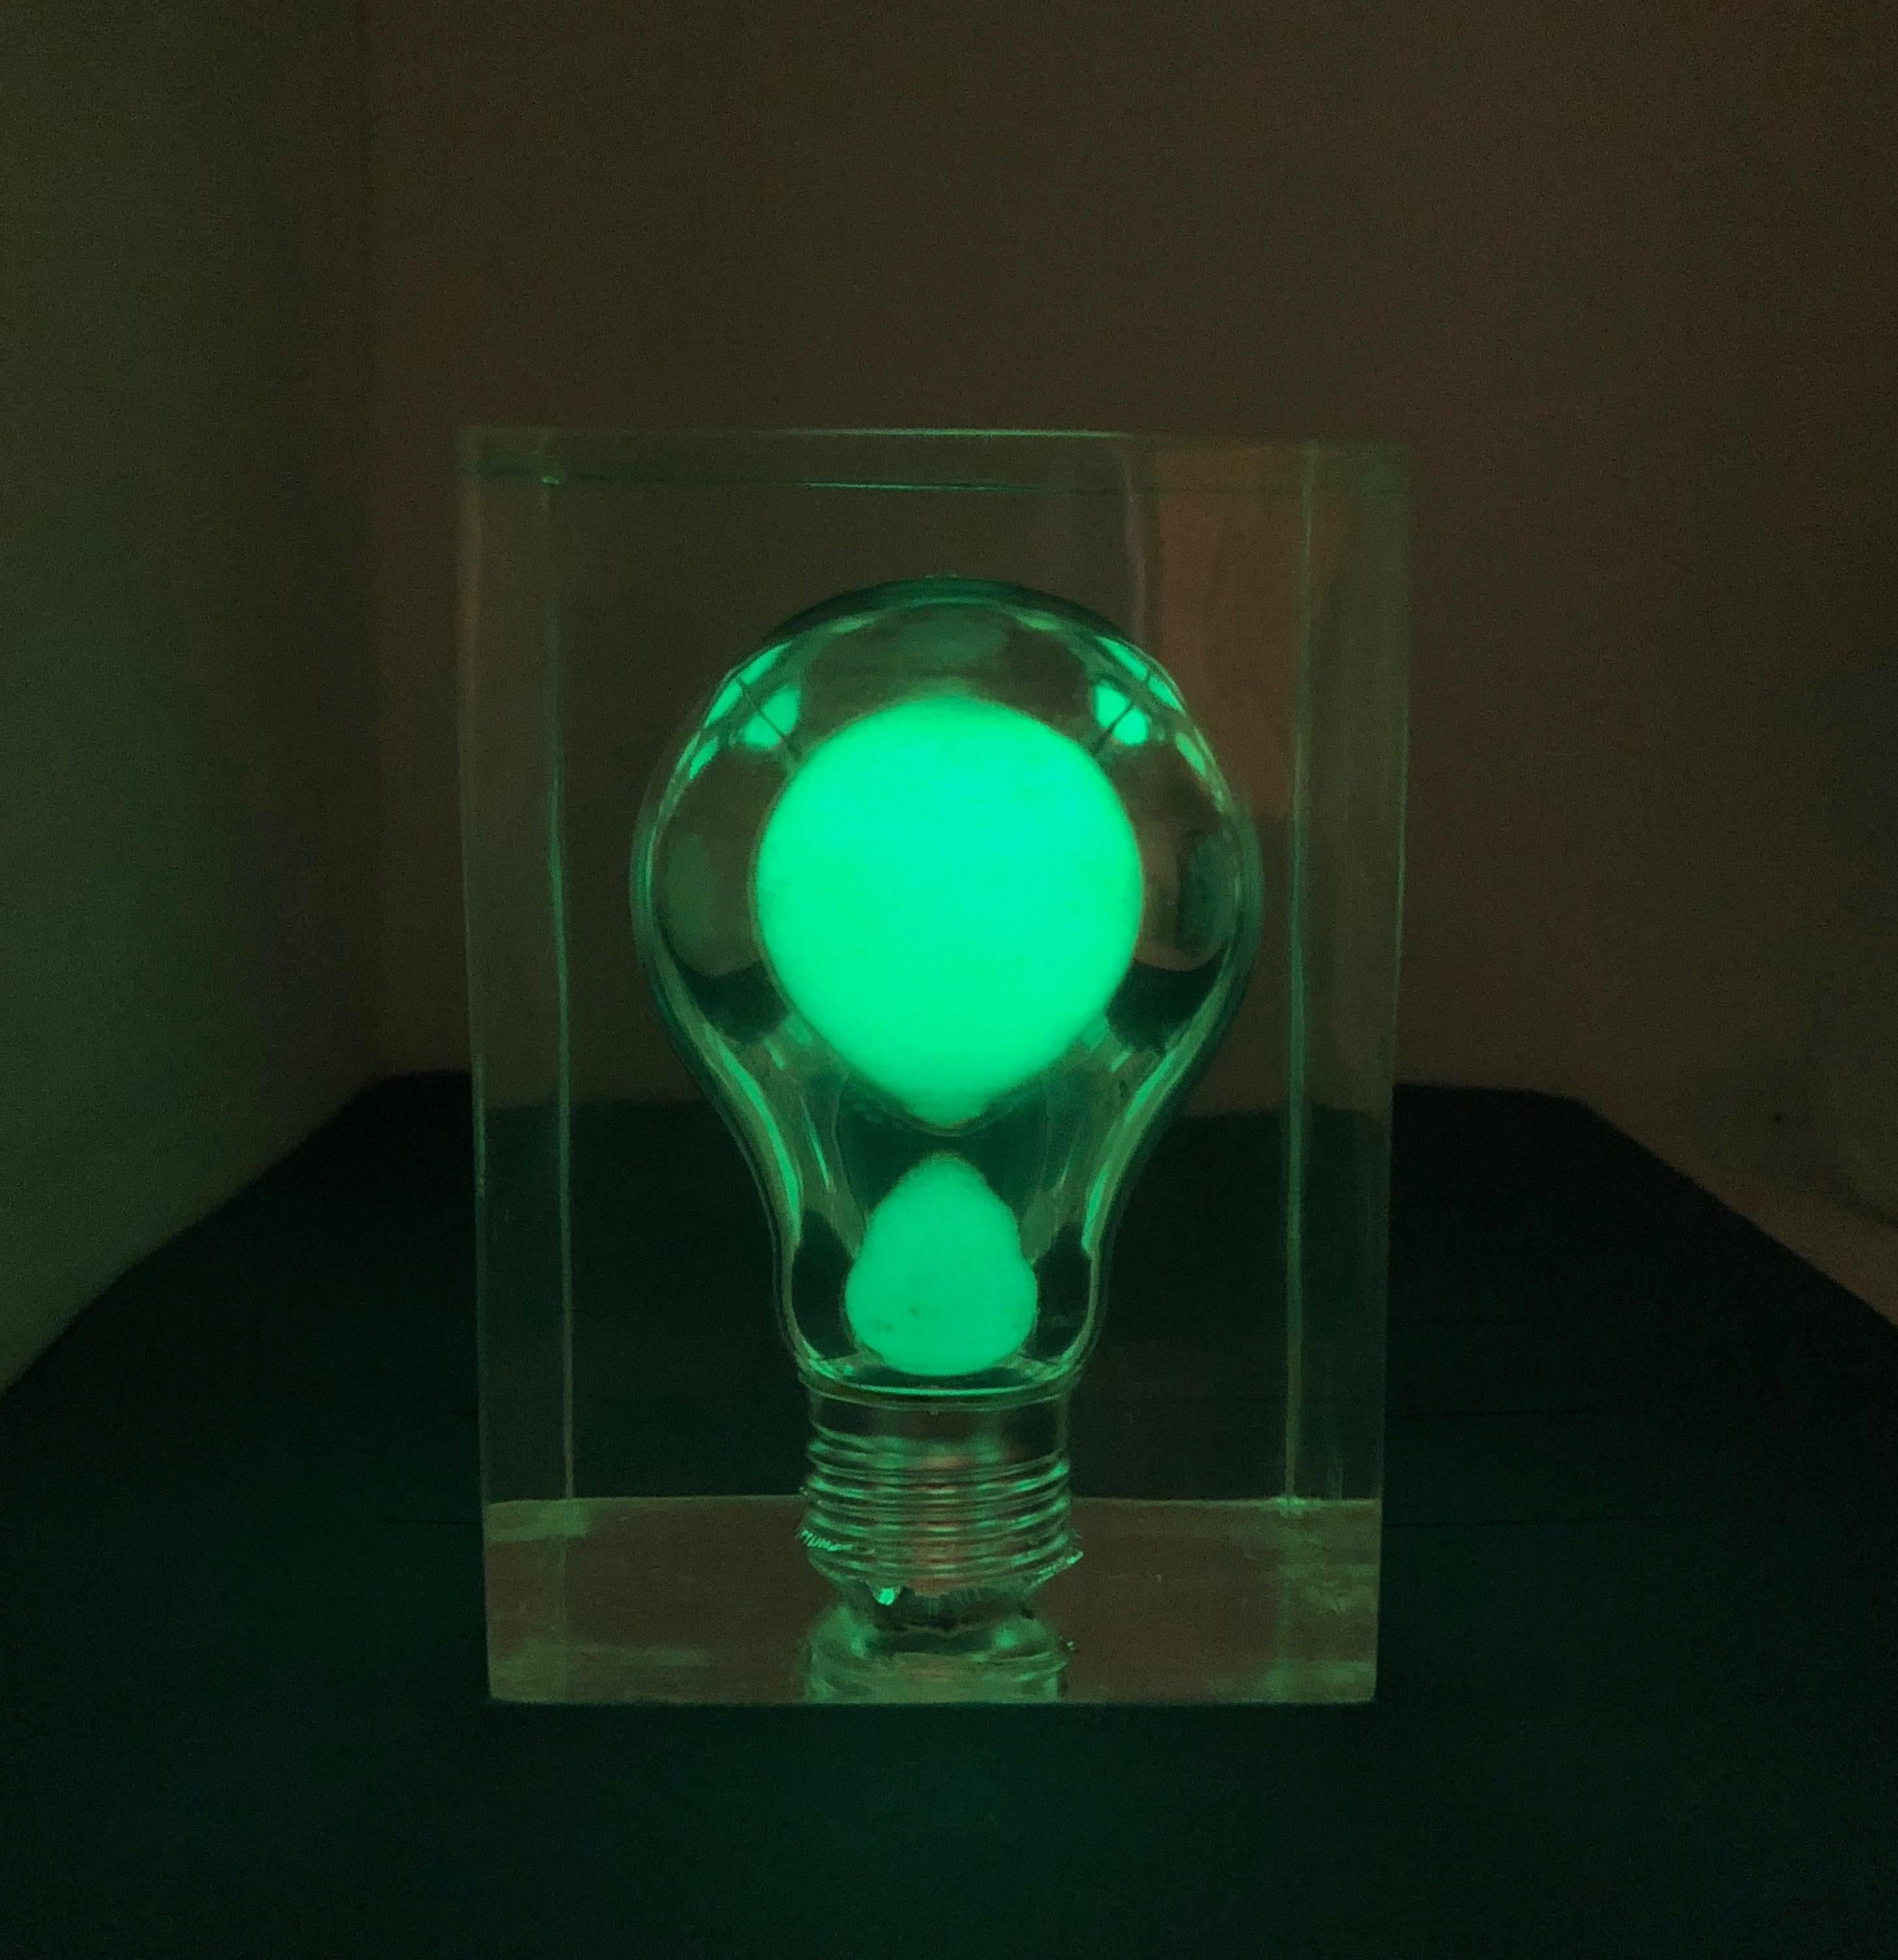 This small but amazing French Pierre Giraudon haunting pop art Lucite light bulb sculpture glows in the dark. It lights up green inside in the dark and has the appearance of a light bulb floating in mid air. The phosphorescent bulb is encased in